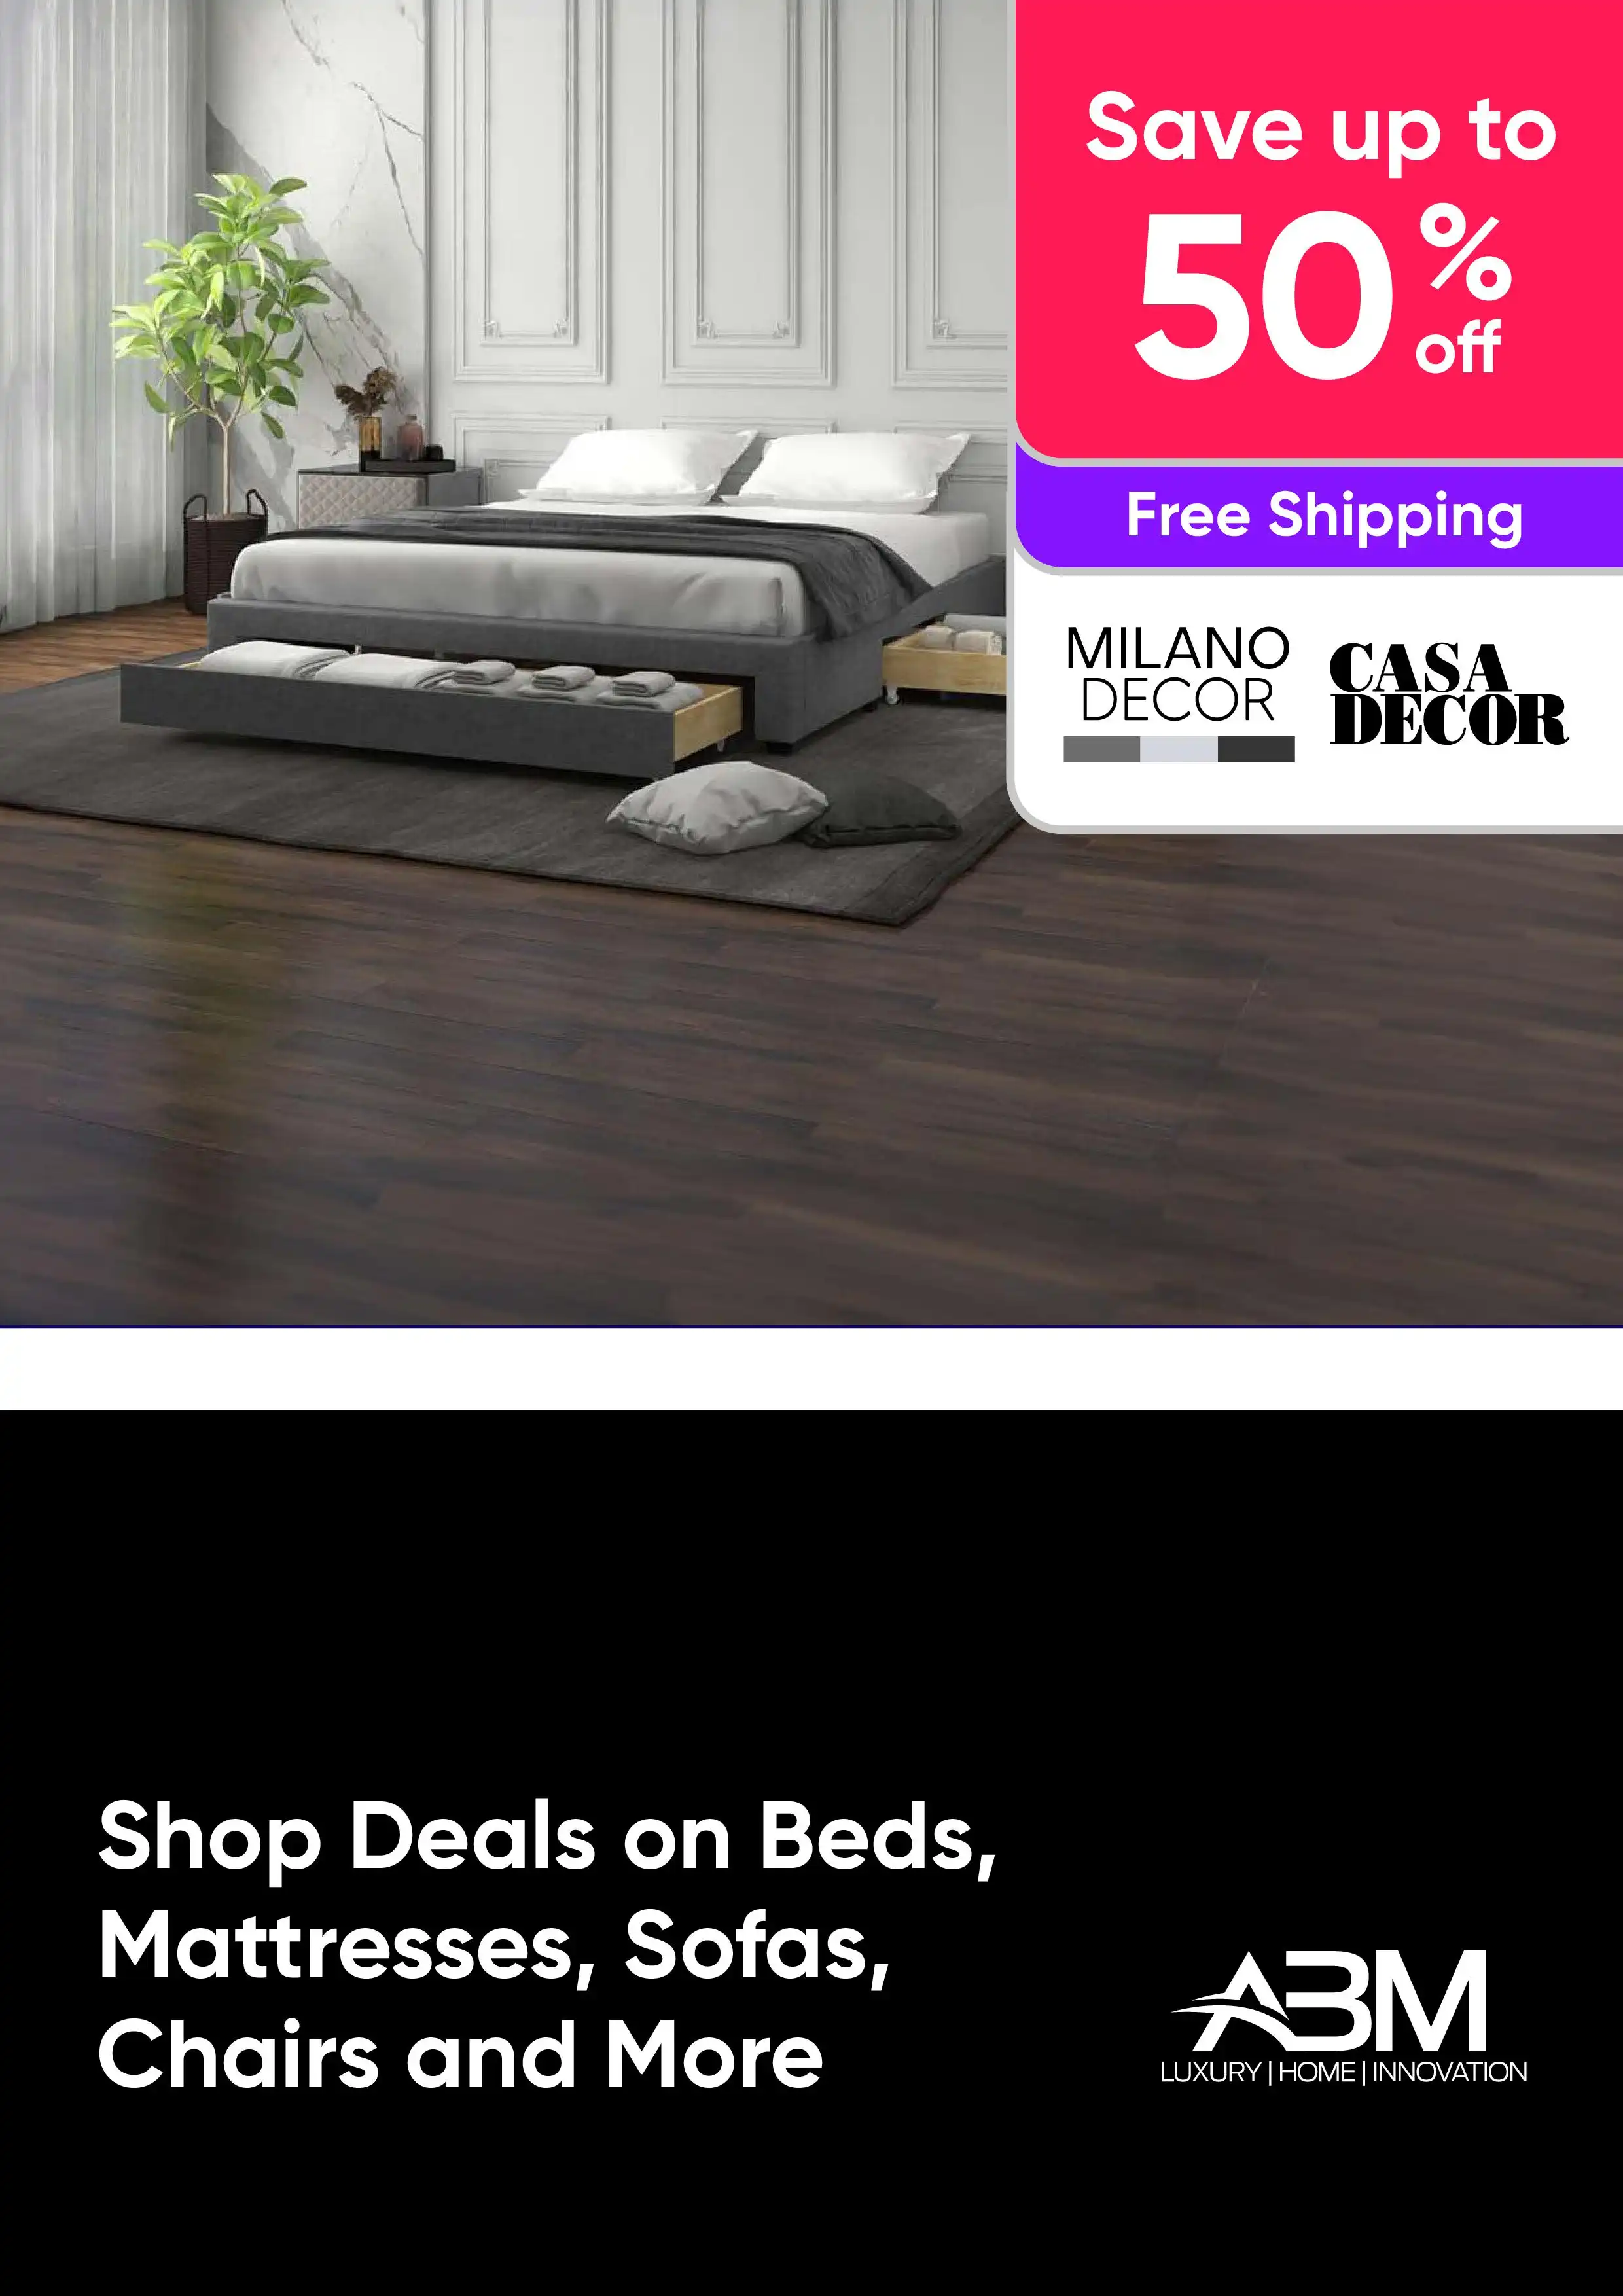 Indoor Furniture Sale - Shop Deals on Beds, Mattresses, Sofas, Chairs and More